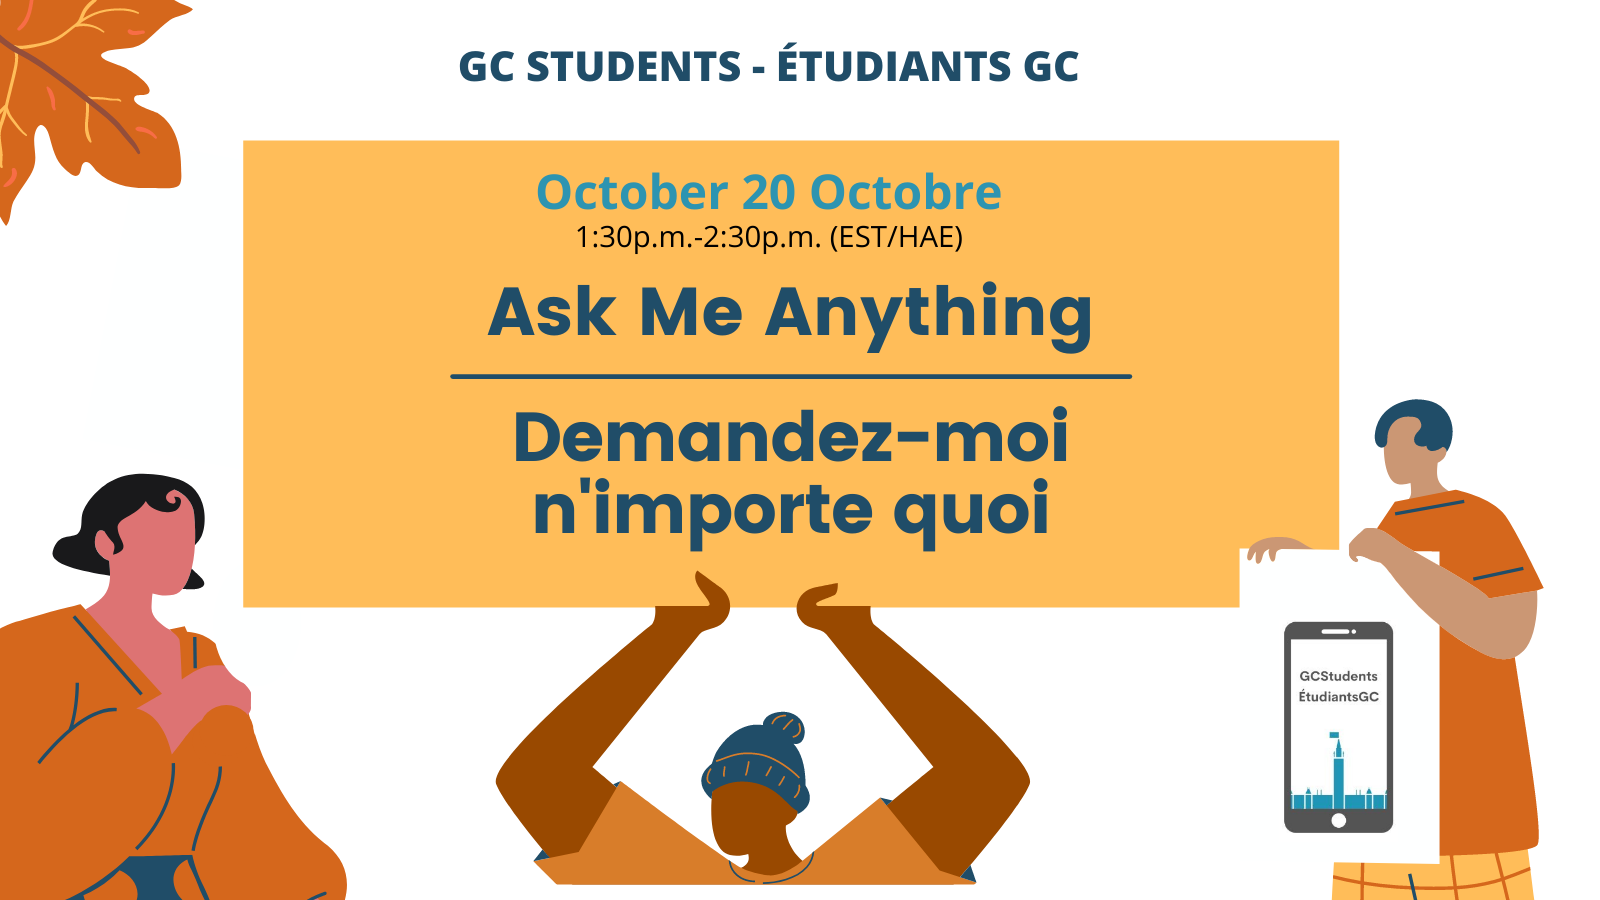 Ask Me Anything promo image for October - Image promo pour Demandez-moi n'importe quoi d'octobre